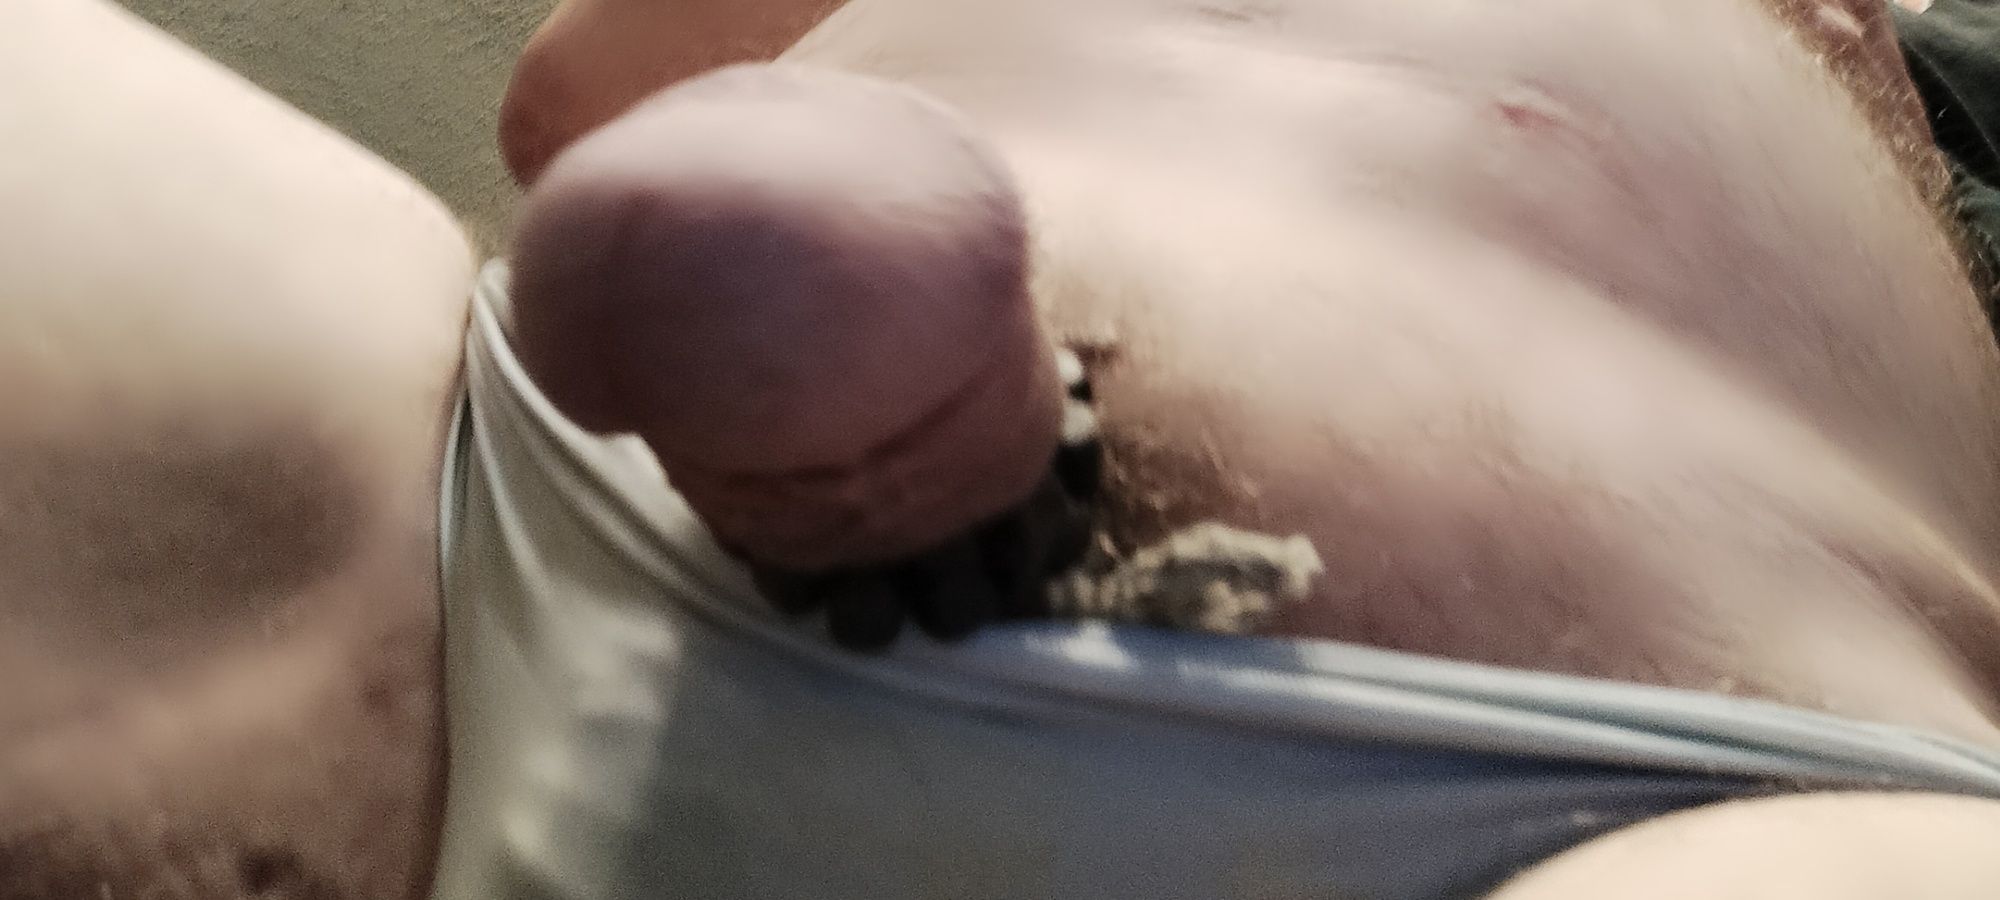 Me toying my asshole and tied up balls and cock and some pan #11